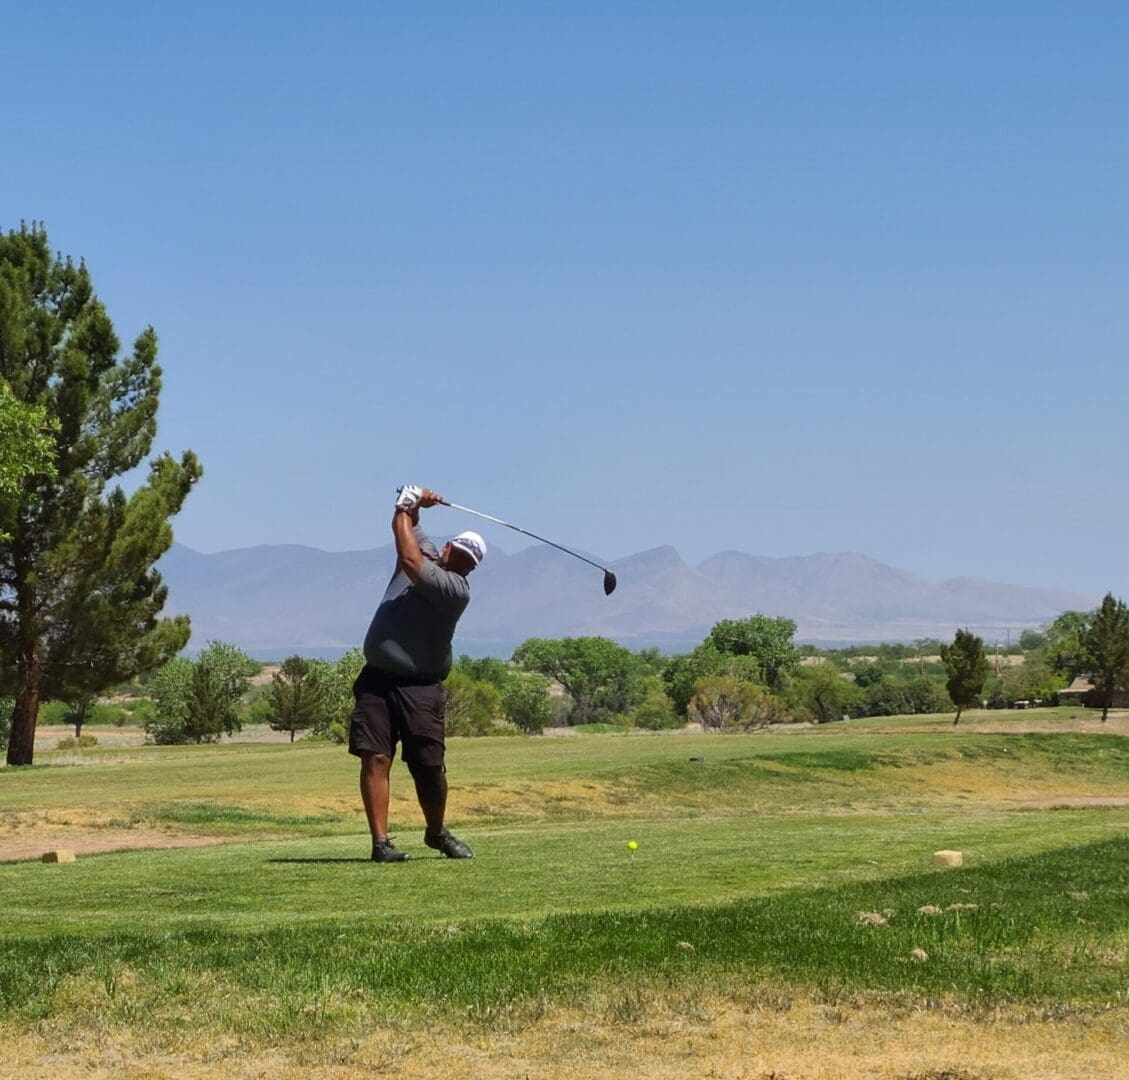 A man swinging at a golf ball on the course.